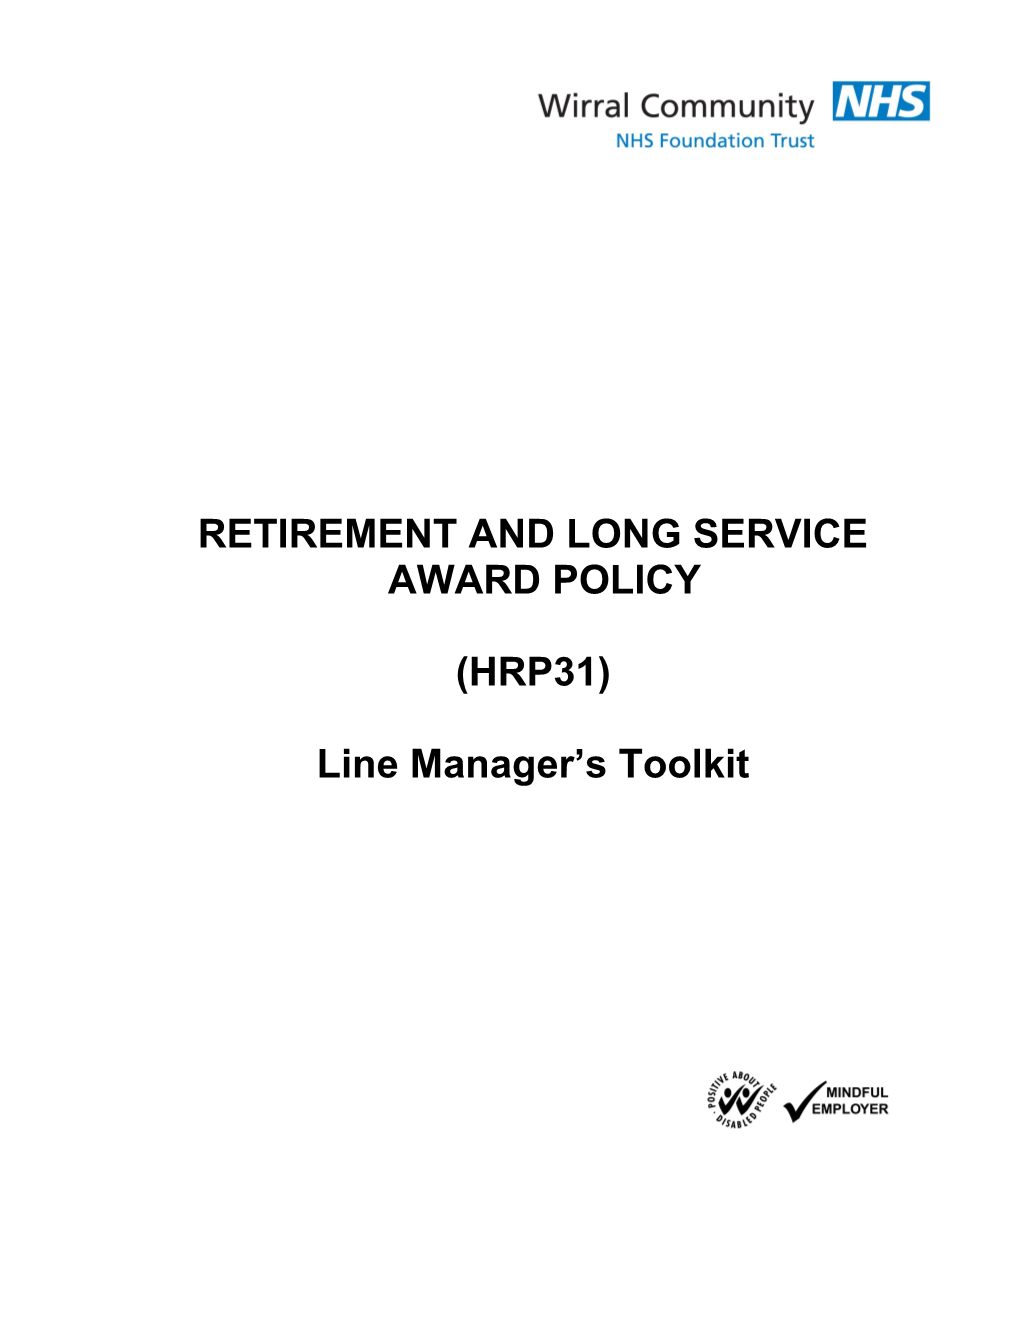 Retirement and Long Service Award Policy